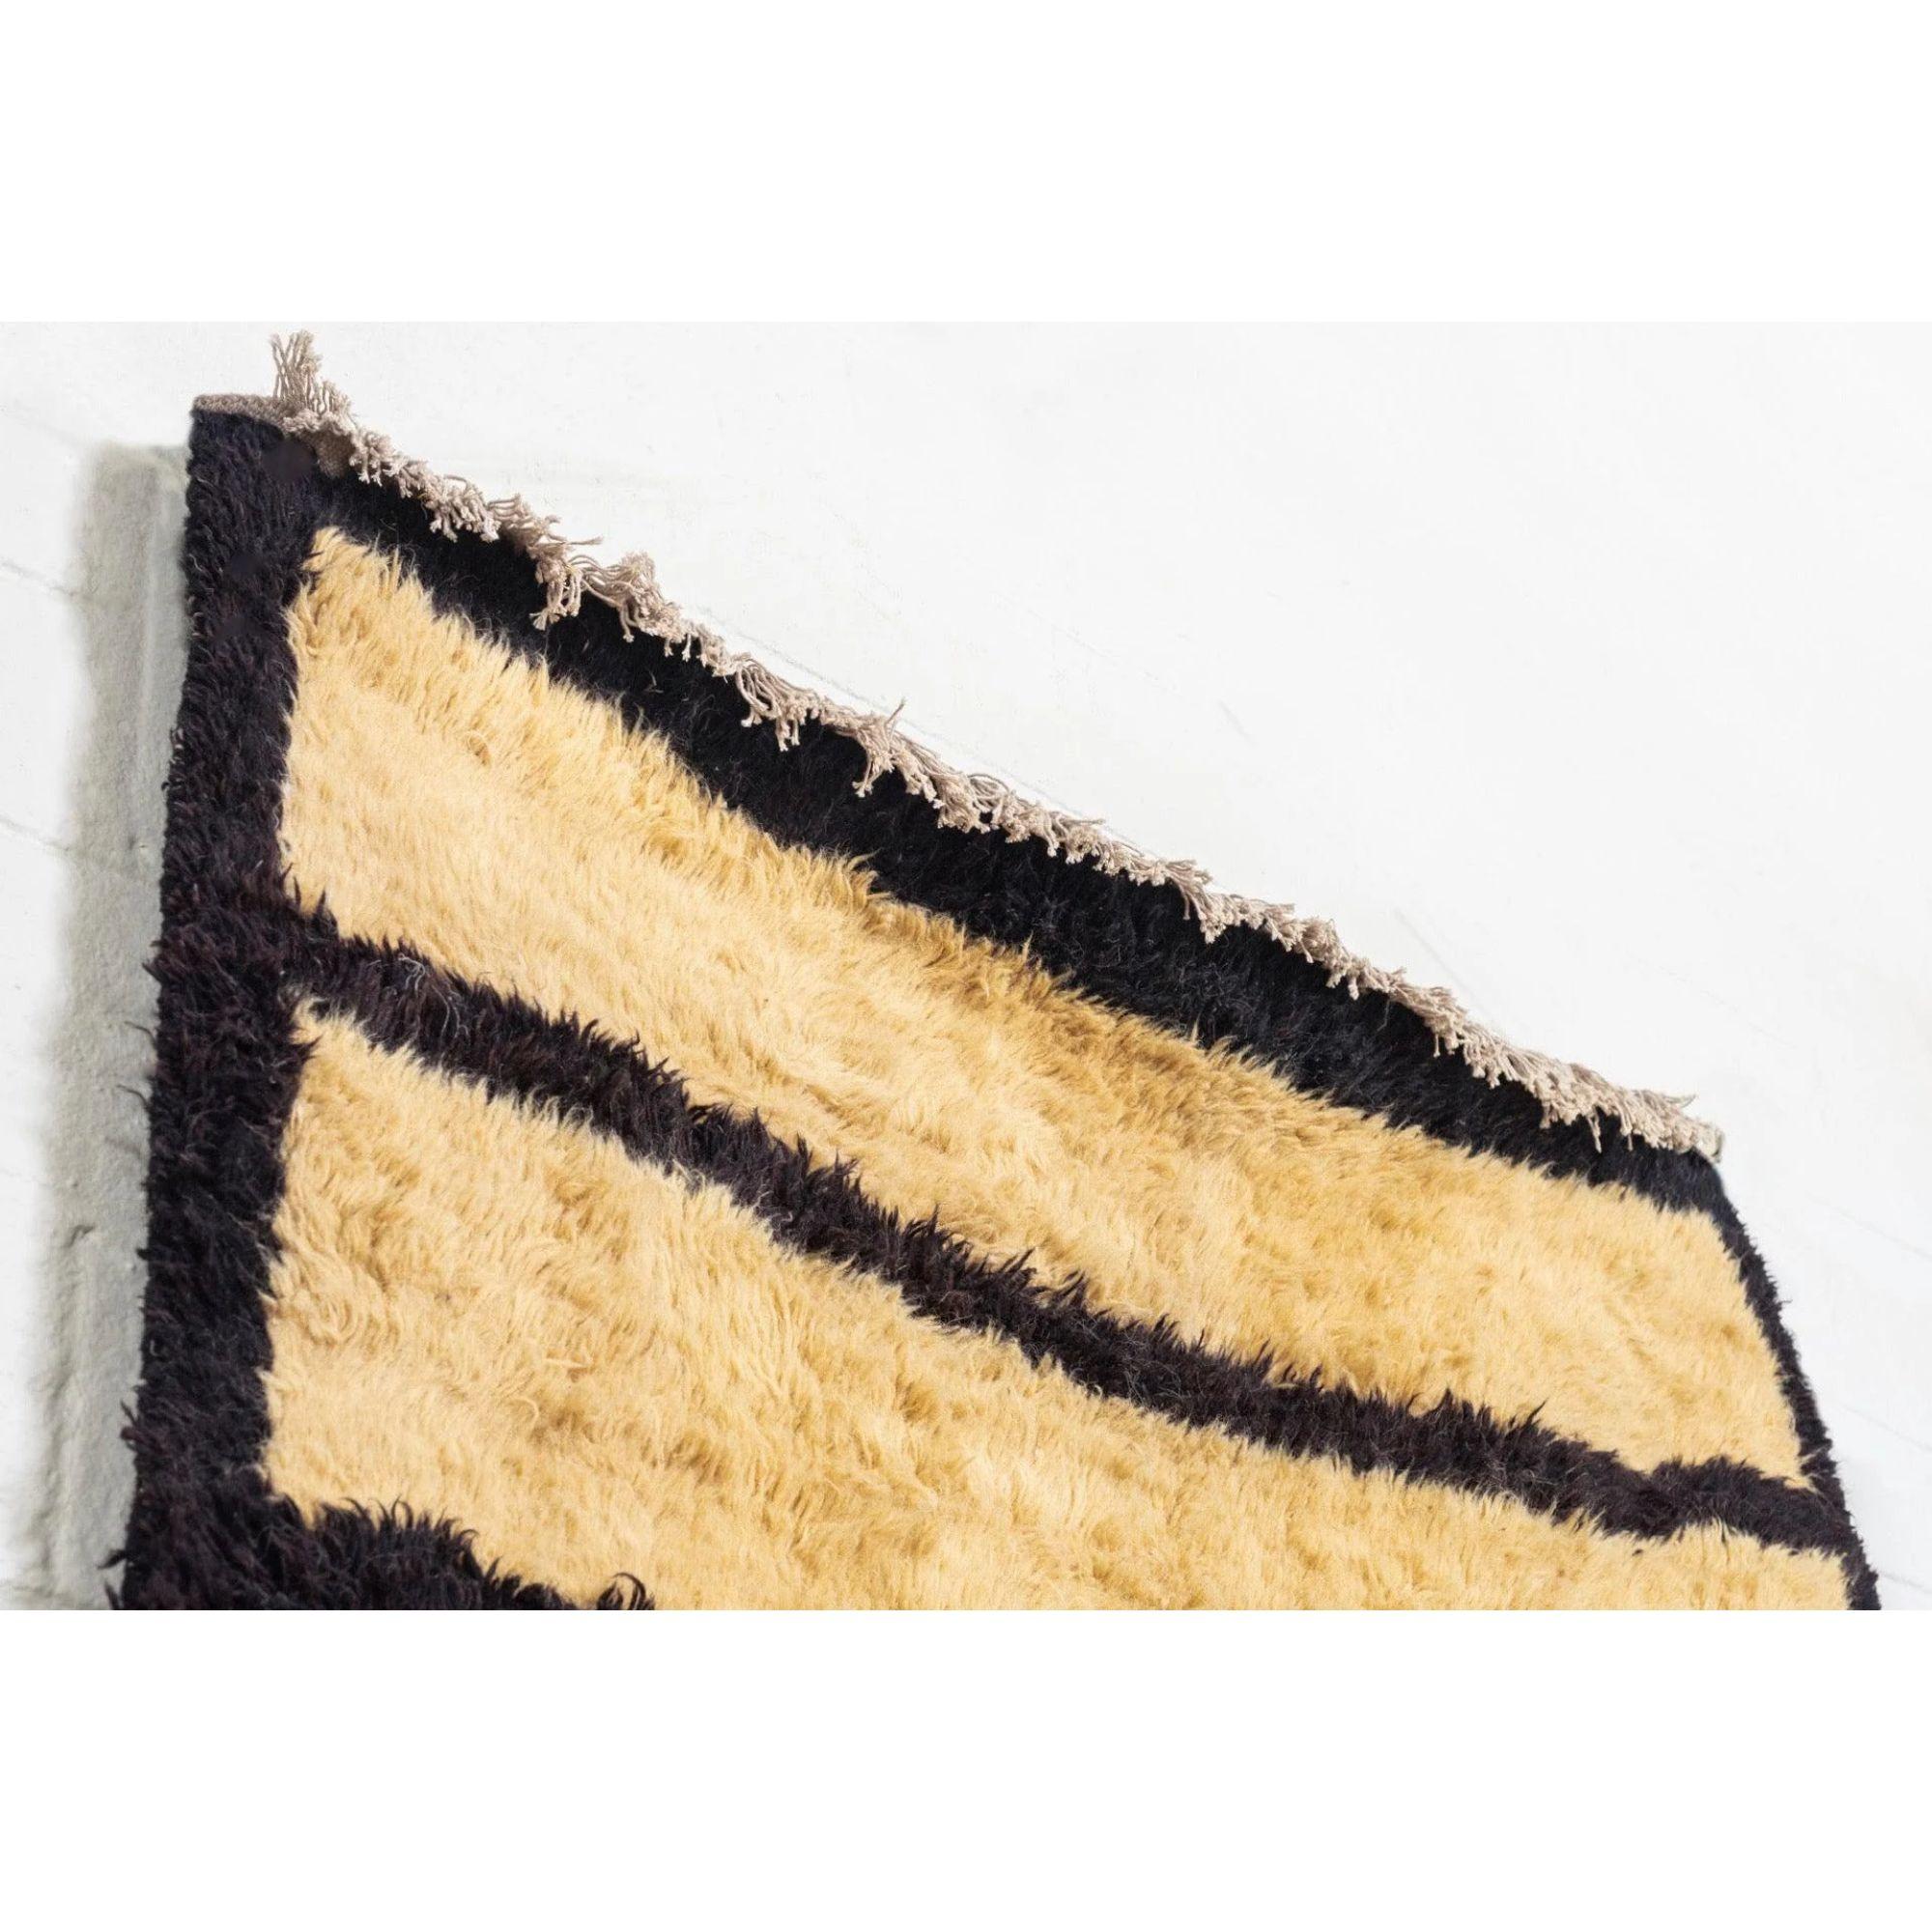 20th Century Vintage Turkish Floor Rug in Beige and Black Striped Shaggy Wool For Sale